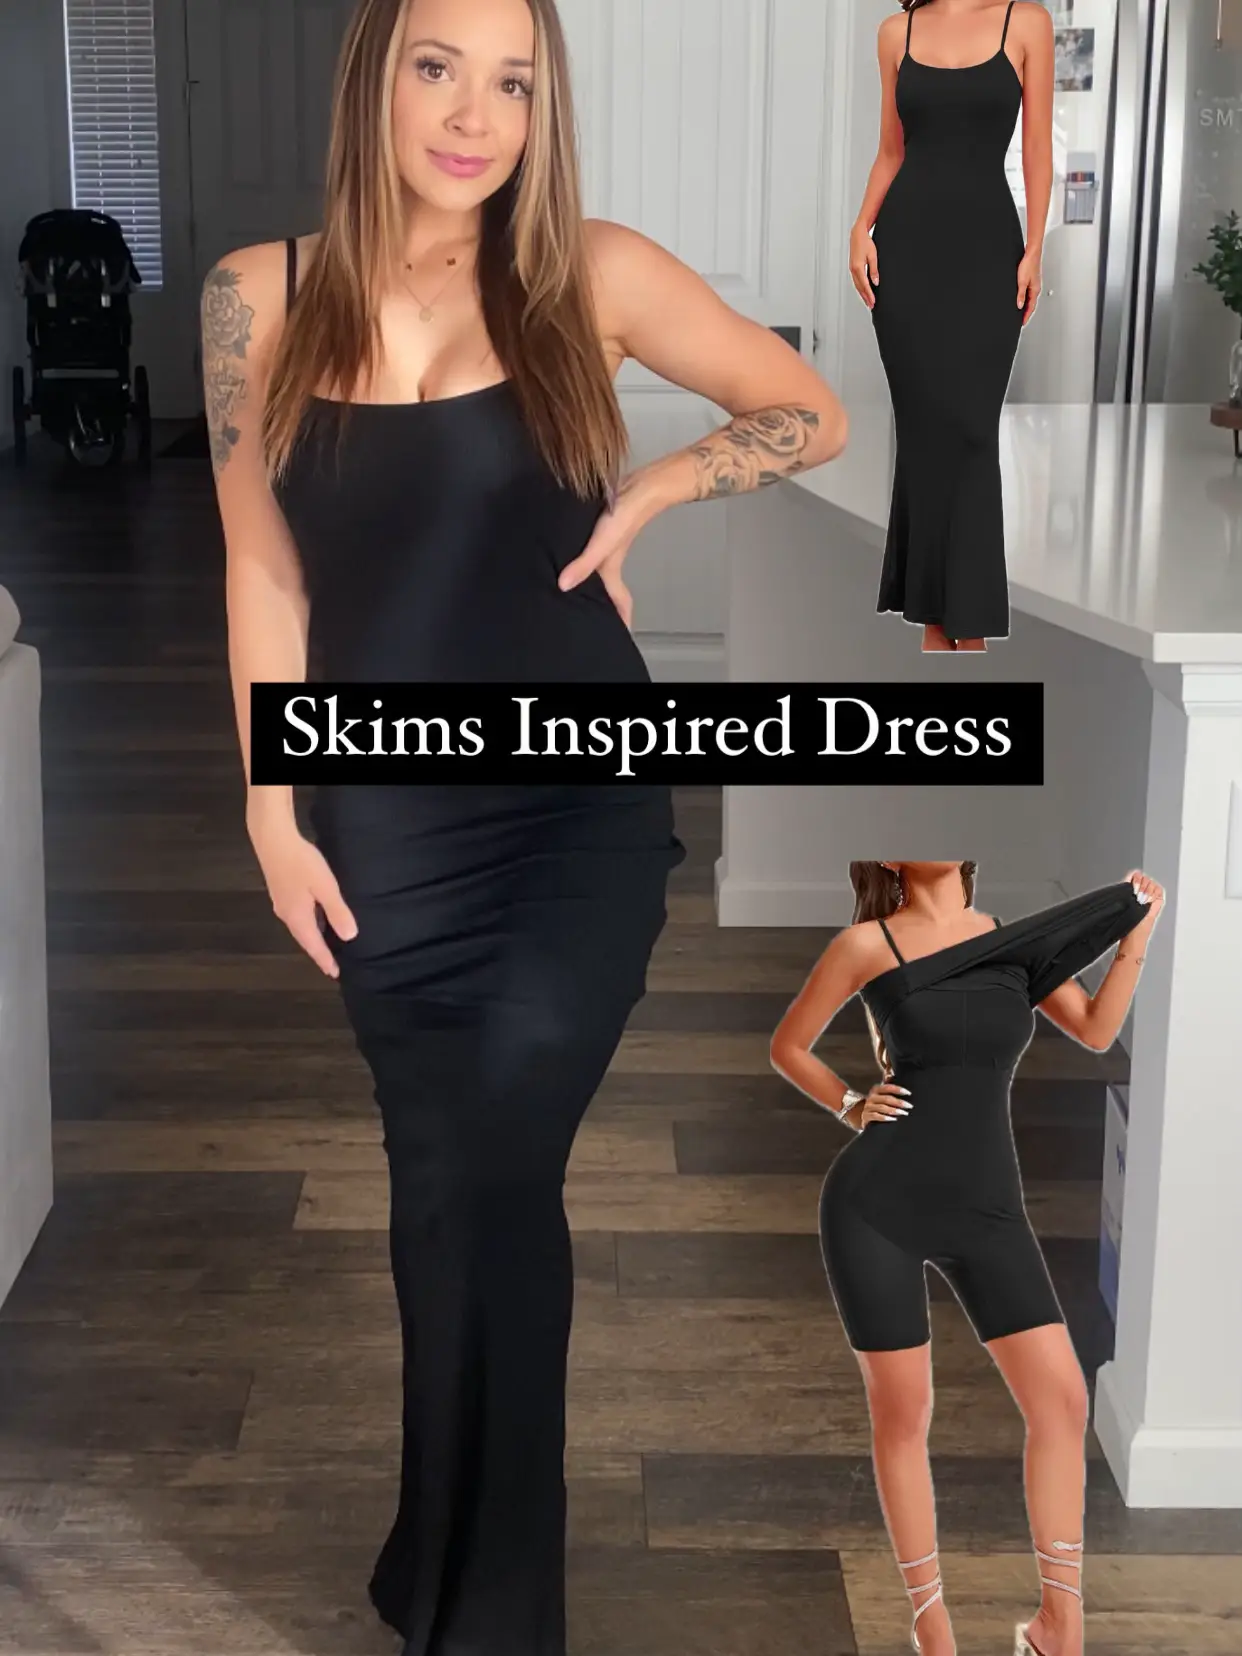 This dress holds everything! LITERALLY! #shapewear #dress #skims #fa